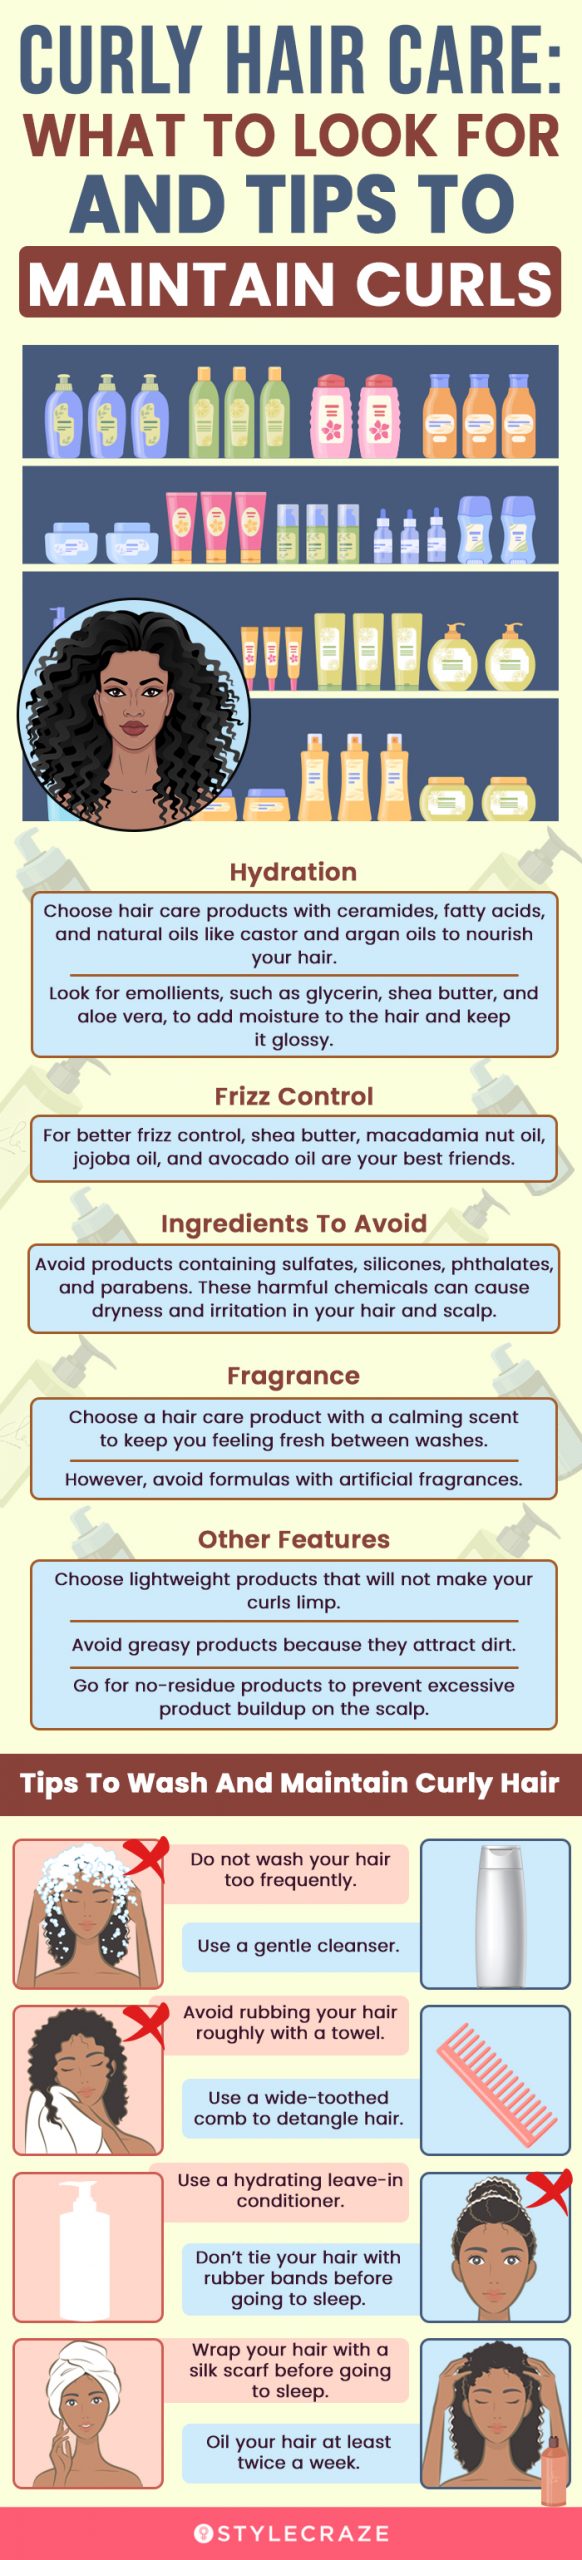 How To Find the Best Drugstore Shampoo And Conditioner For Curly Hair (infographic)